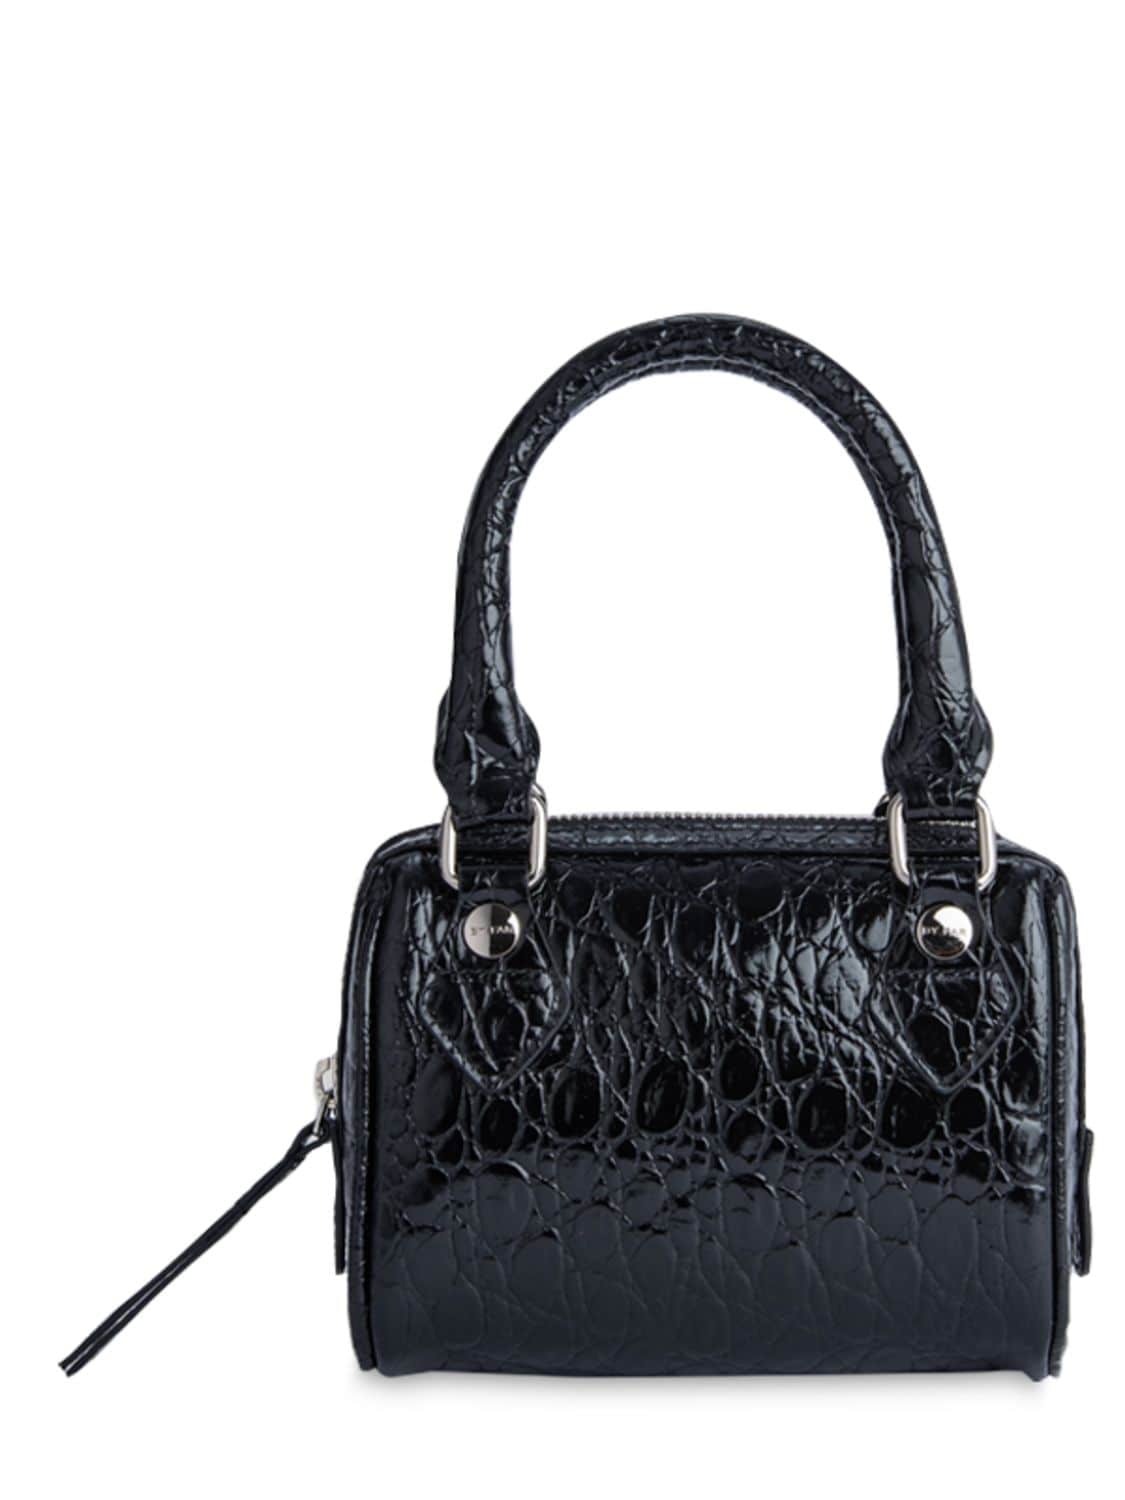 BY FAR DORA EMBOSSED LEATHER TOP HANDLE BAG